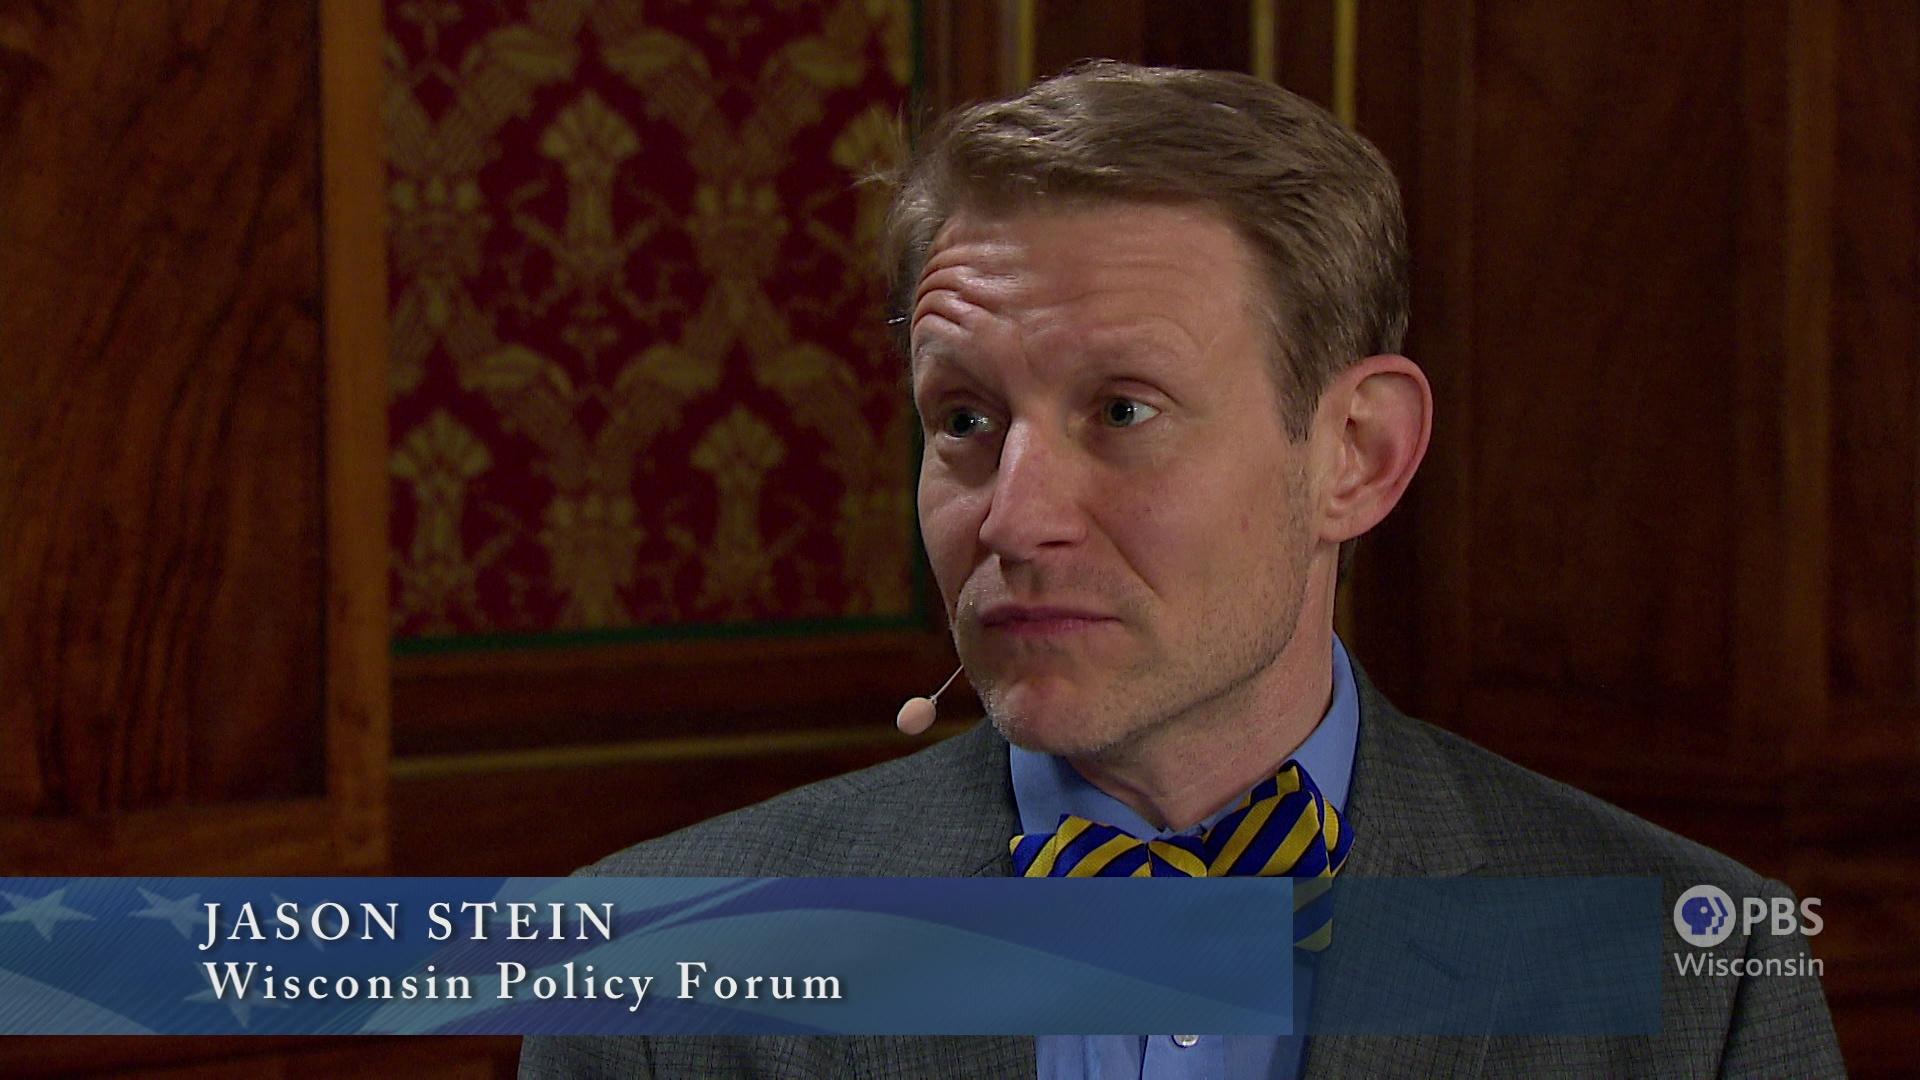 A still image from a video shows Jason Stein speaking into a headset microphone while seated in front of wood paneling, with a graphic at bottom reading 'Jason Stein' and 'Wisconsin Policy Forum.'